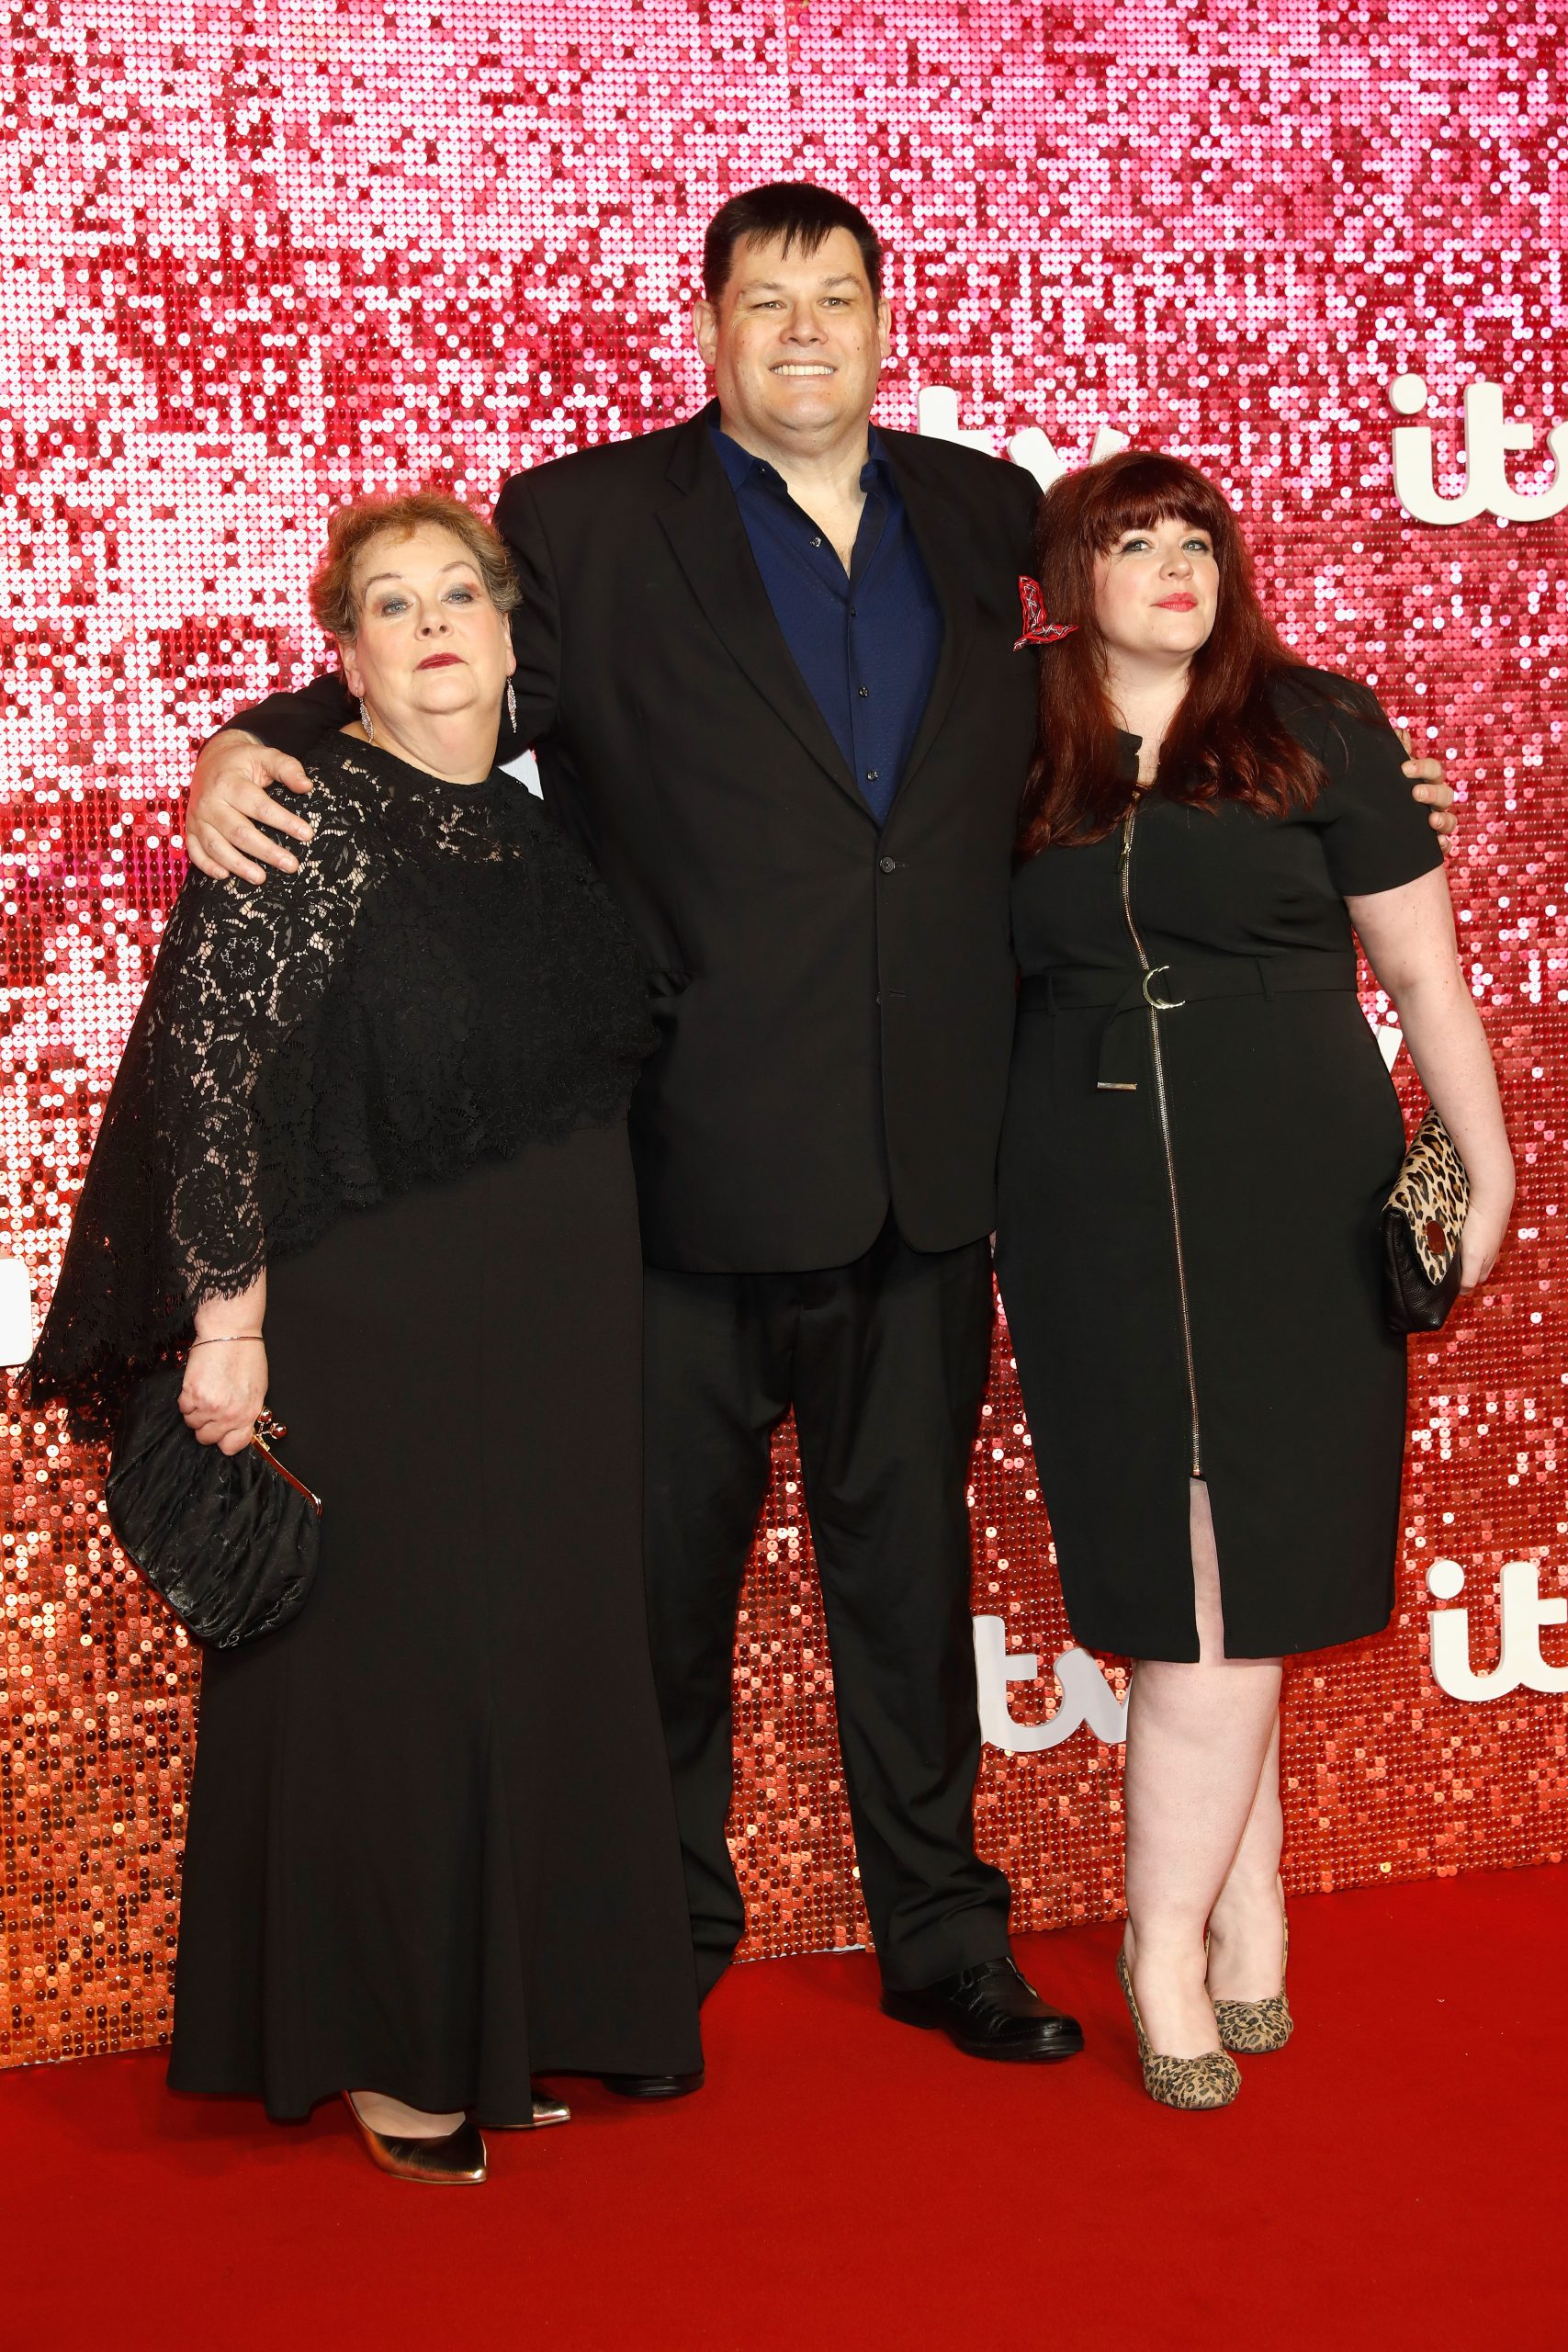 Anne Hegerty photo